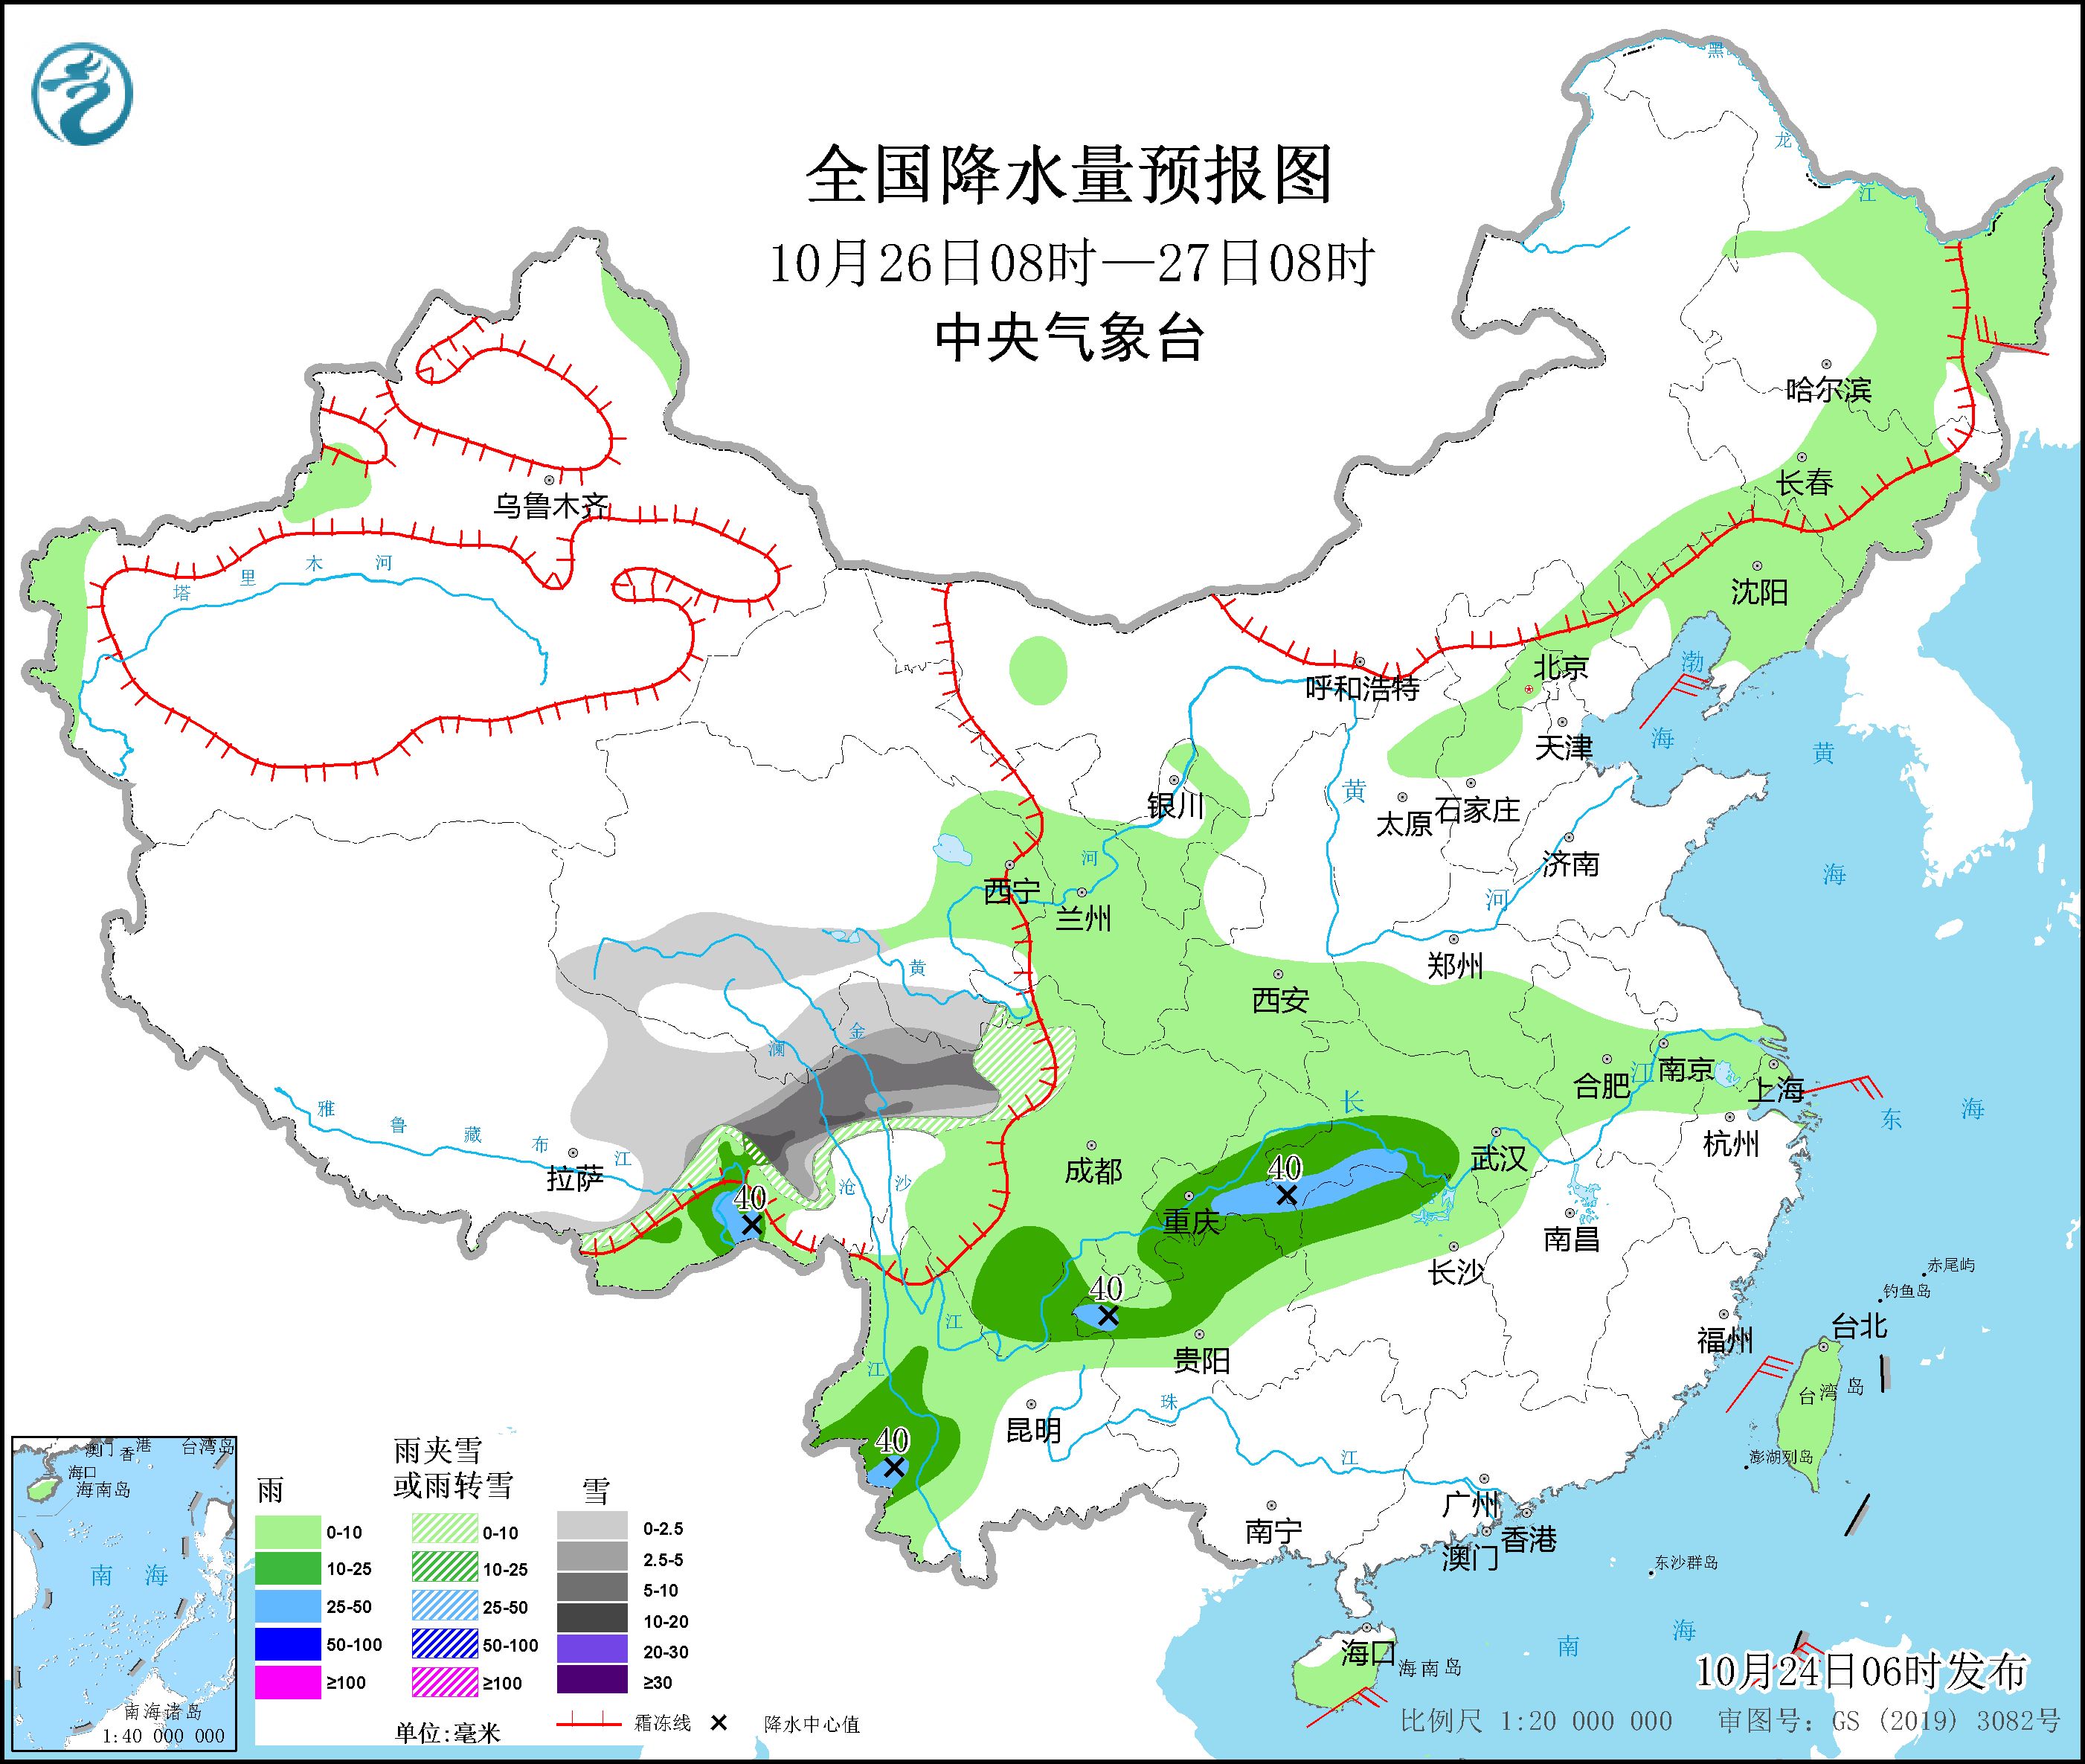 There will be strong rain and snow in the eastern part of the Qinghai-Tibet Plateau, and there will be strong wind and rain in Hainan Island